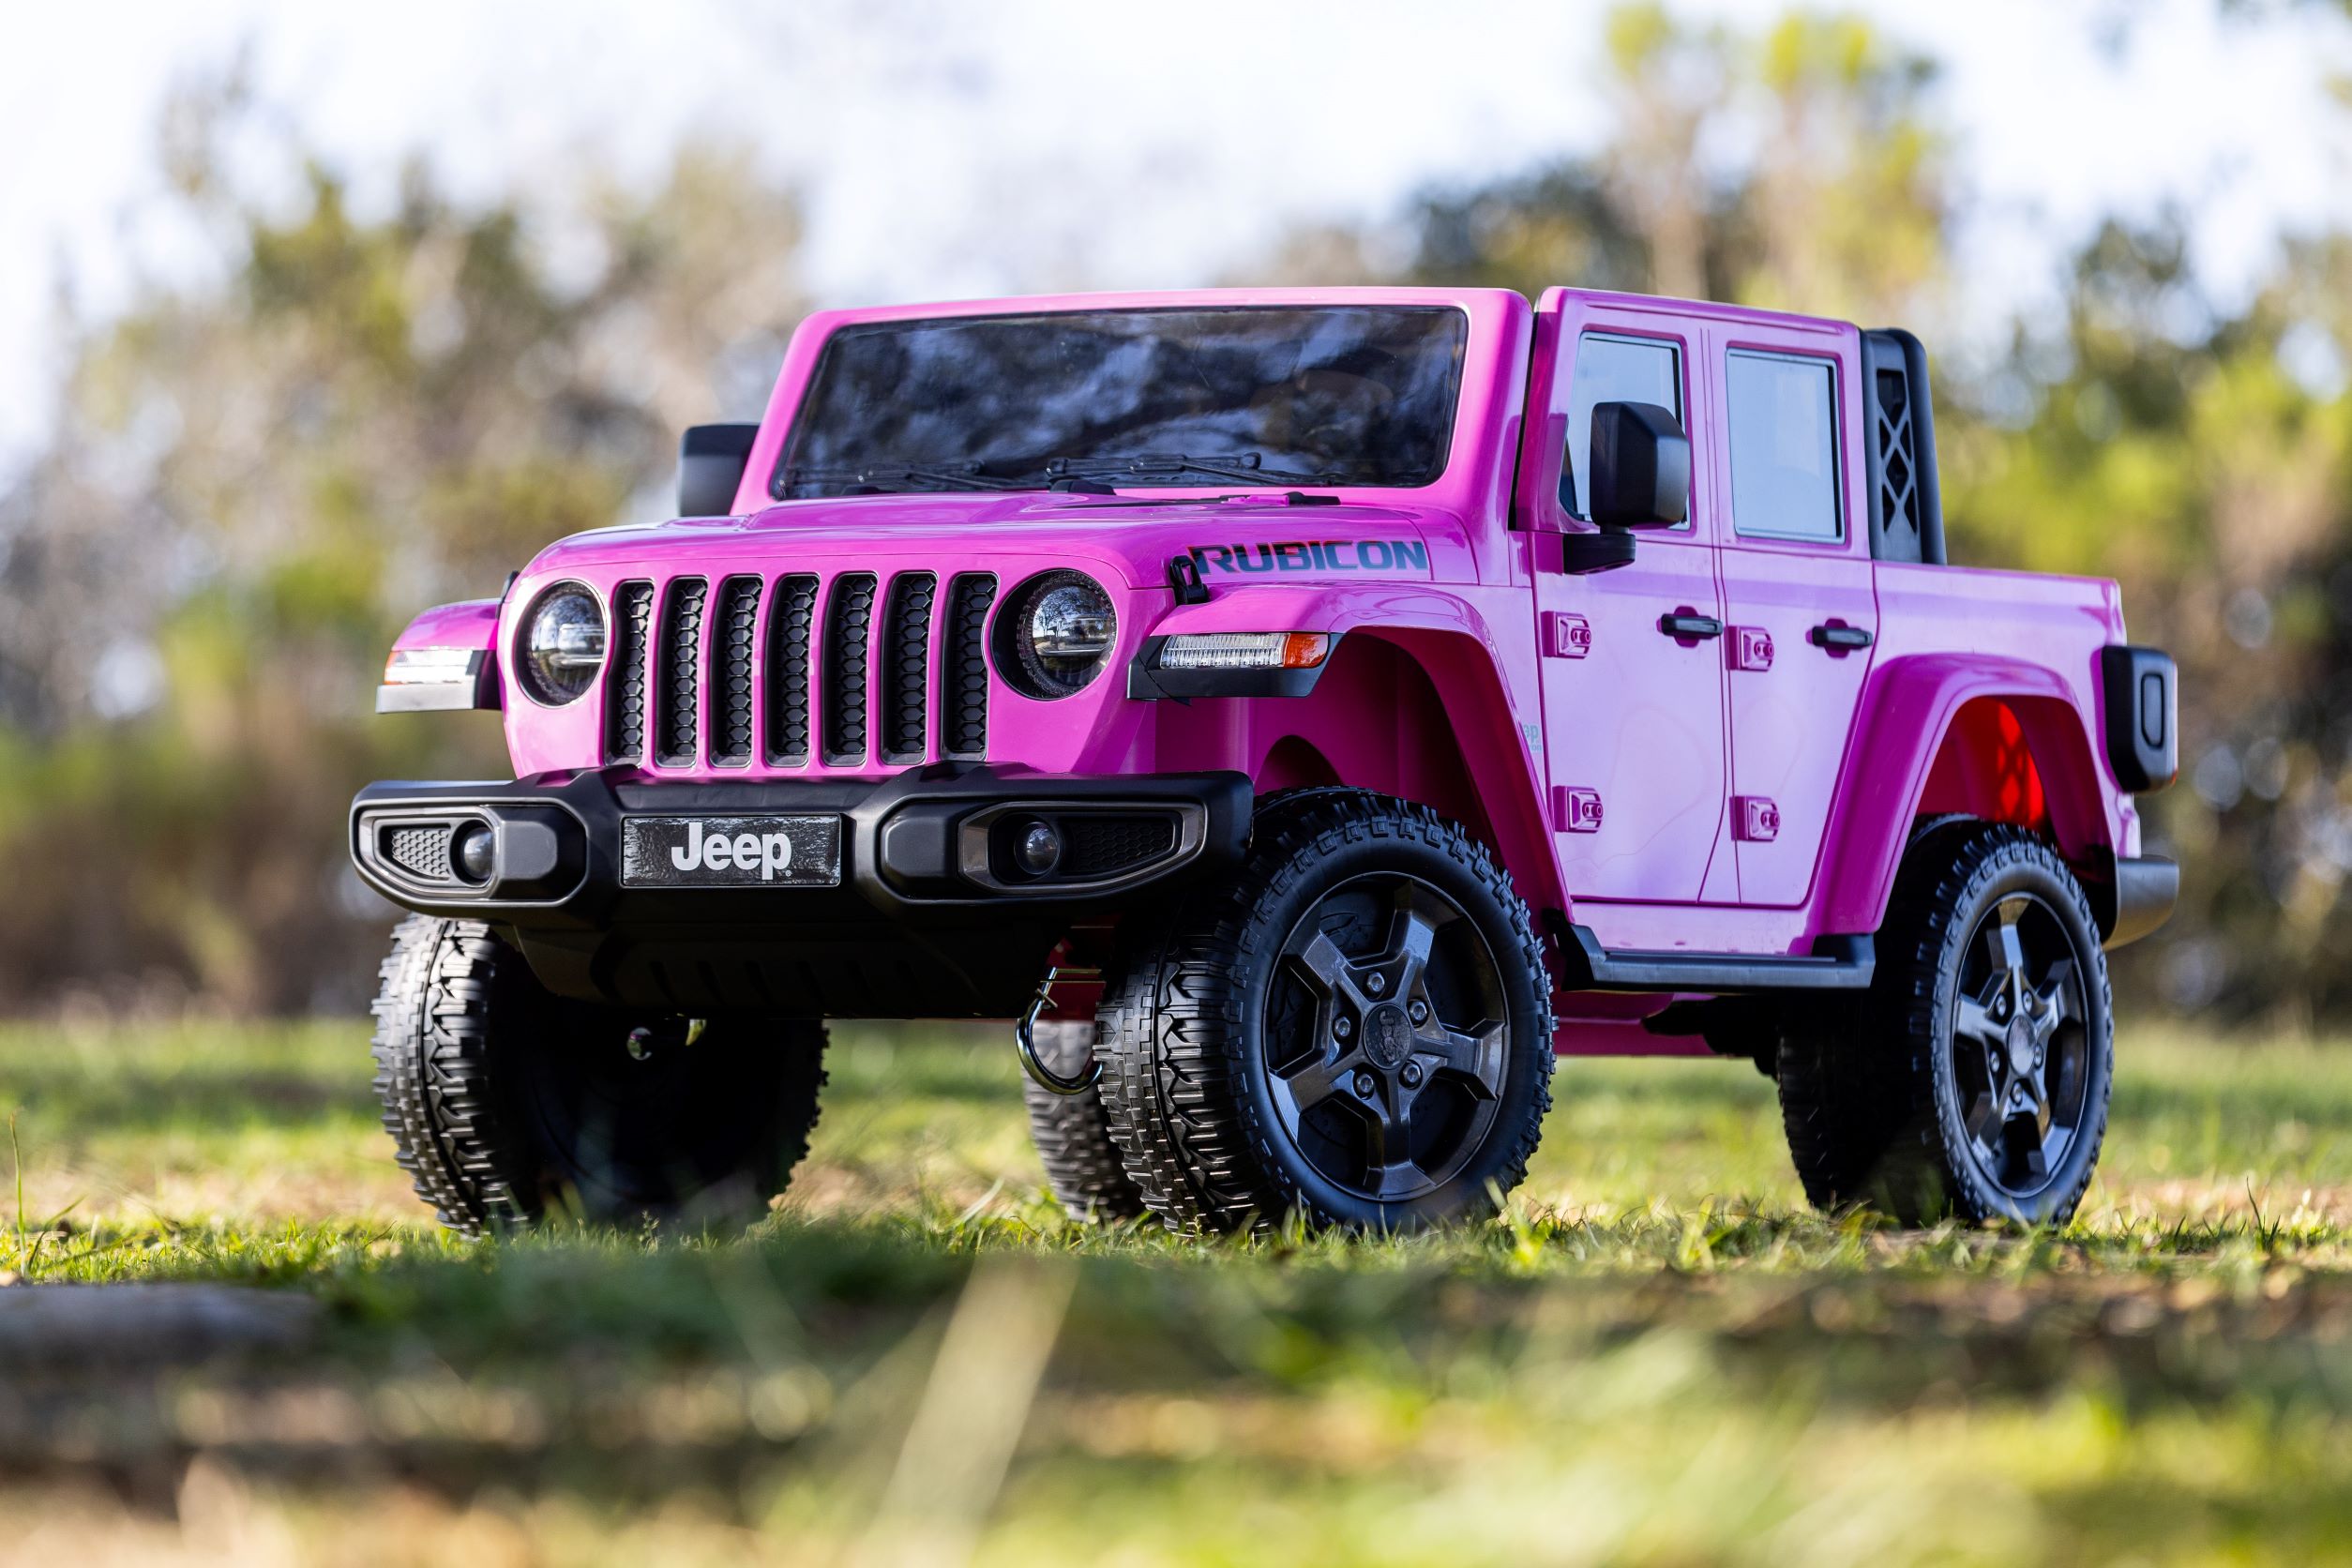 12V Jeep Gladiator Rubicon Battery Powered Ride-on by Hyper Toys, 2-Seater, Pink, for a Child Ages 3-8, Max Speed 5 mph - image 4 of 13